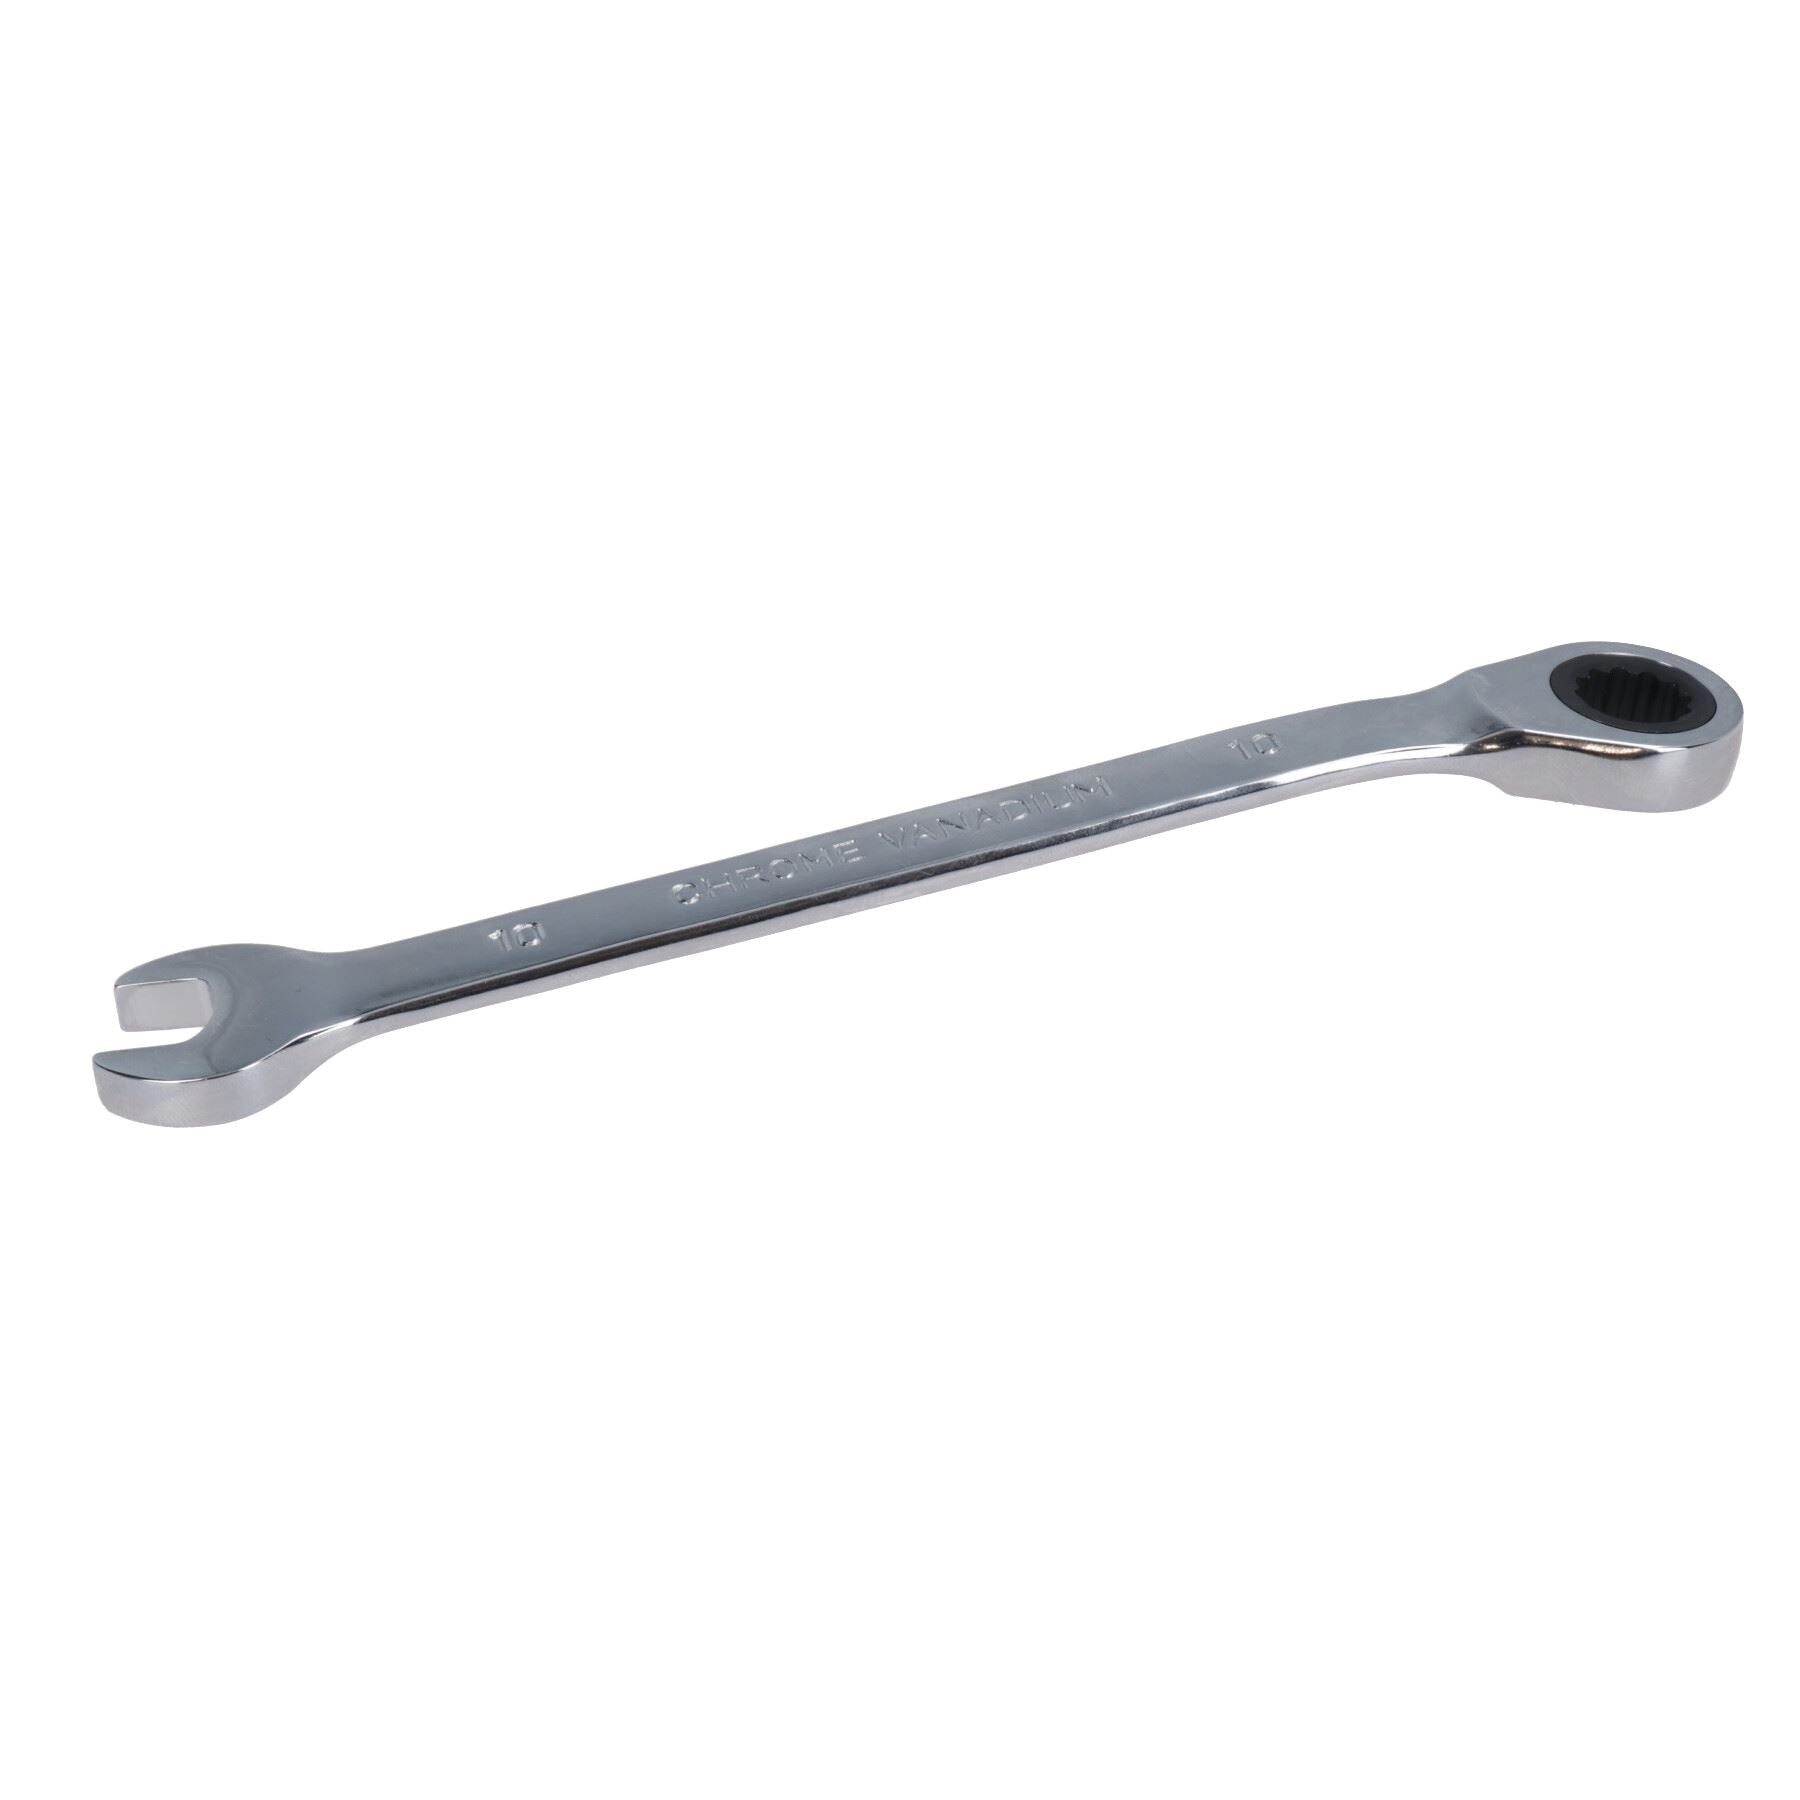 10mm Reversible Cranked Offset Ratchet Combination Spanner Wrench 72 Teeth